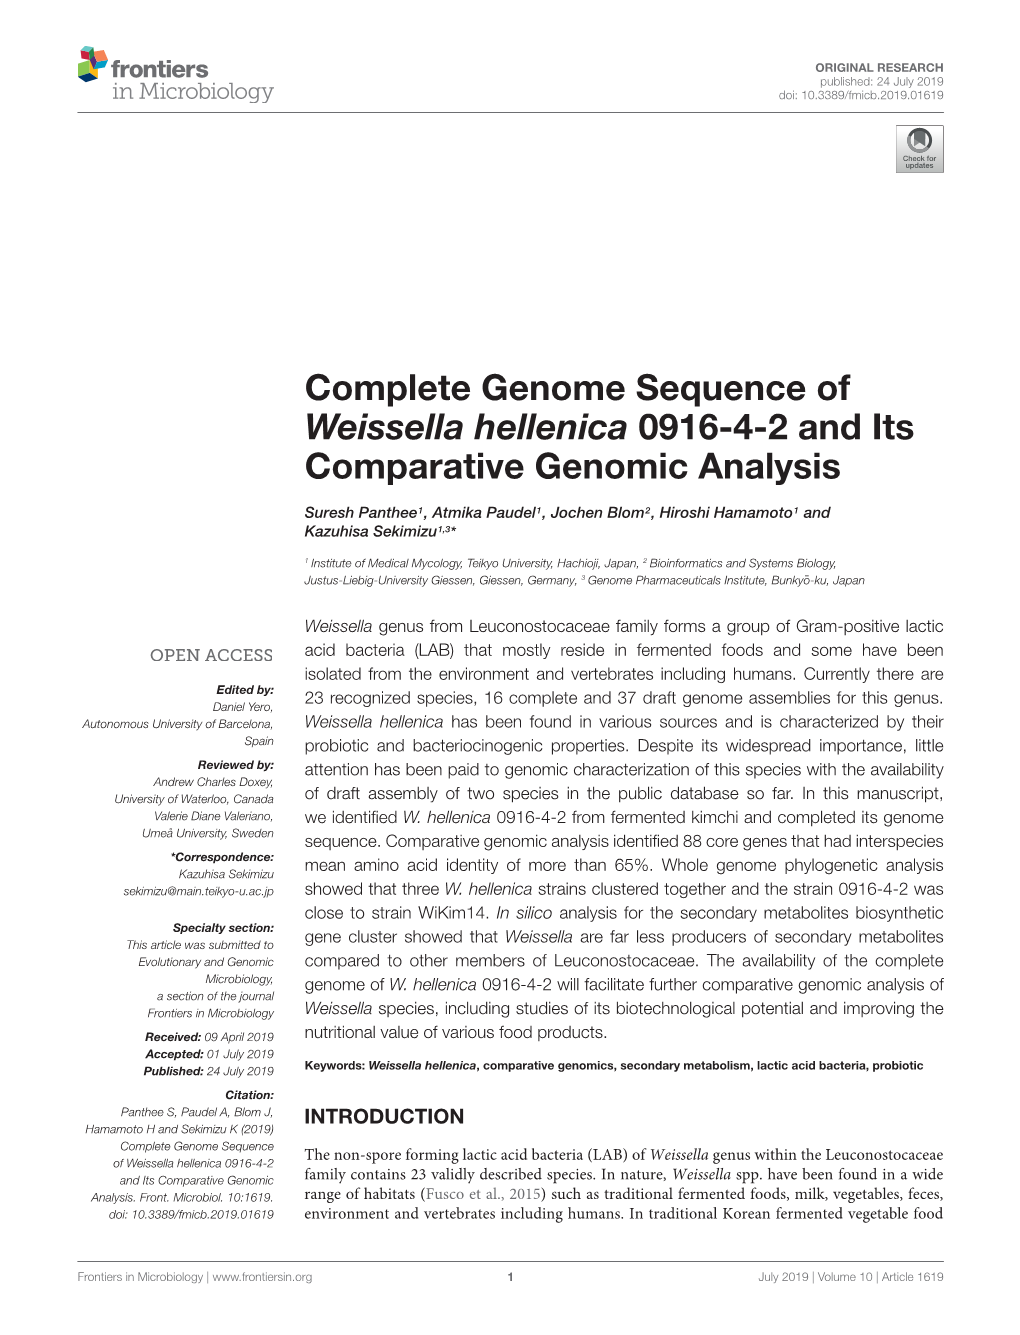 Complete Genome Sequence of Weissella Hellenica 0916-4-2 and Its Comparative Genomic Analysis